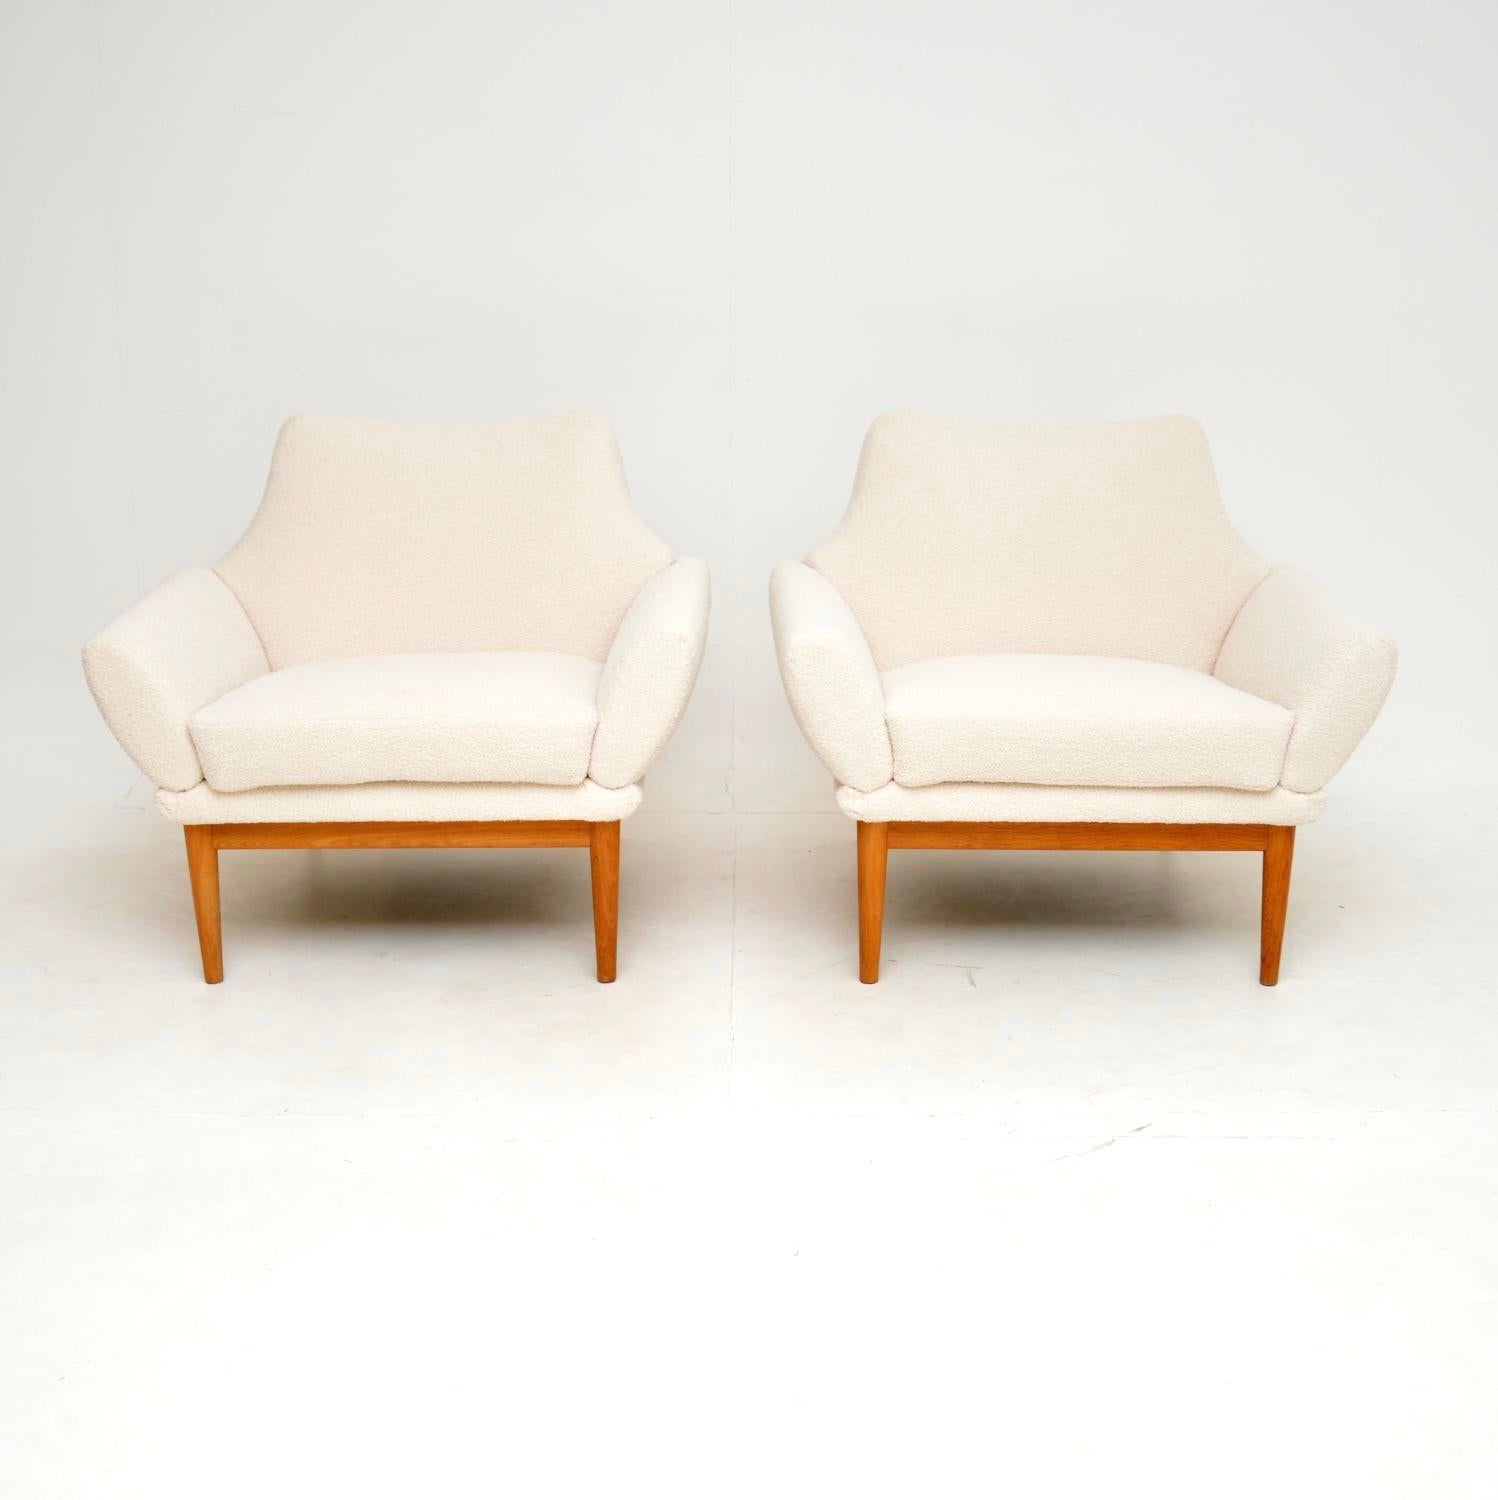 An absolutely stunning pair of vintage Danish armchairs, designed by Johannes Andersen. This model is called the ‘Hollywood’, they were made in Denmark by Trensums and dates from around the 1960’s.

They are of amazing quality and have an